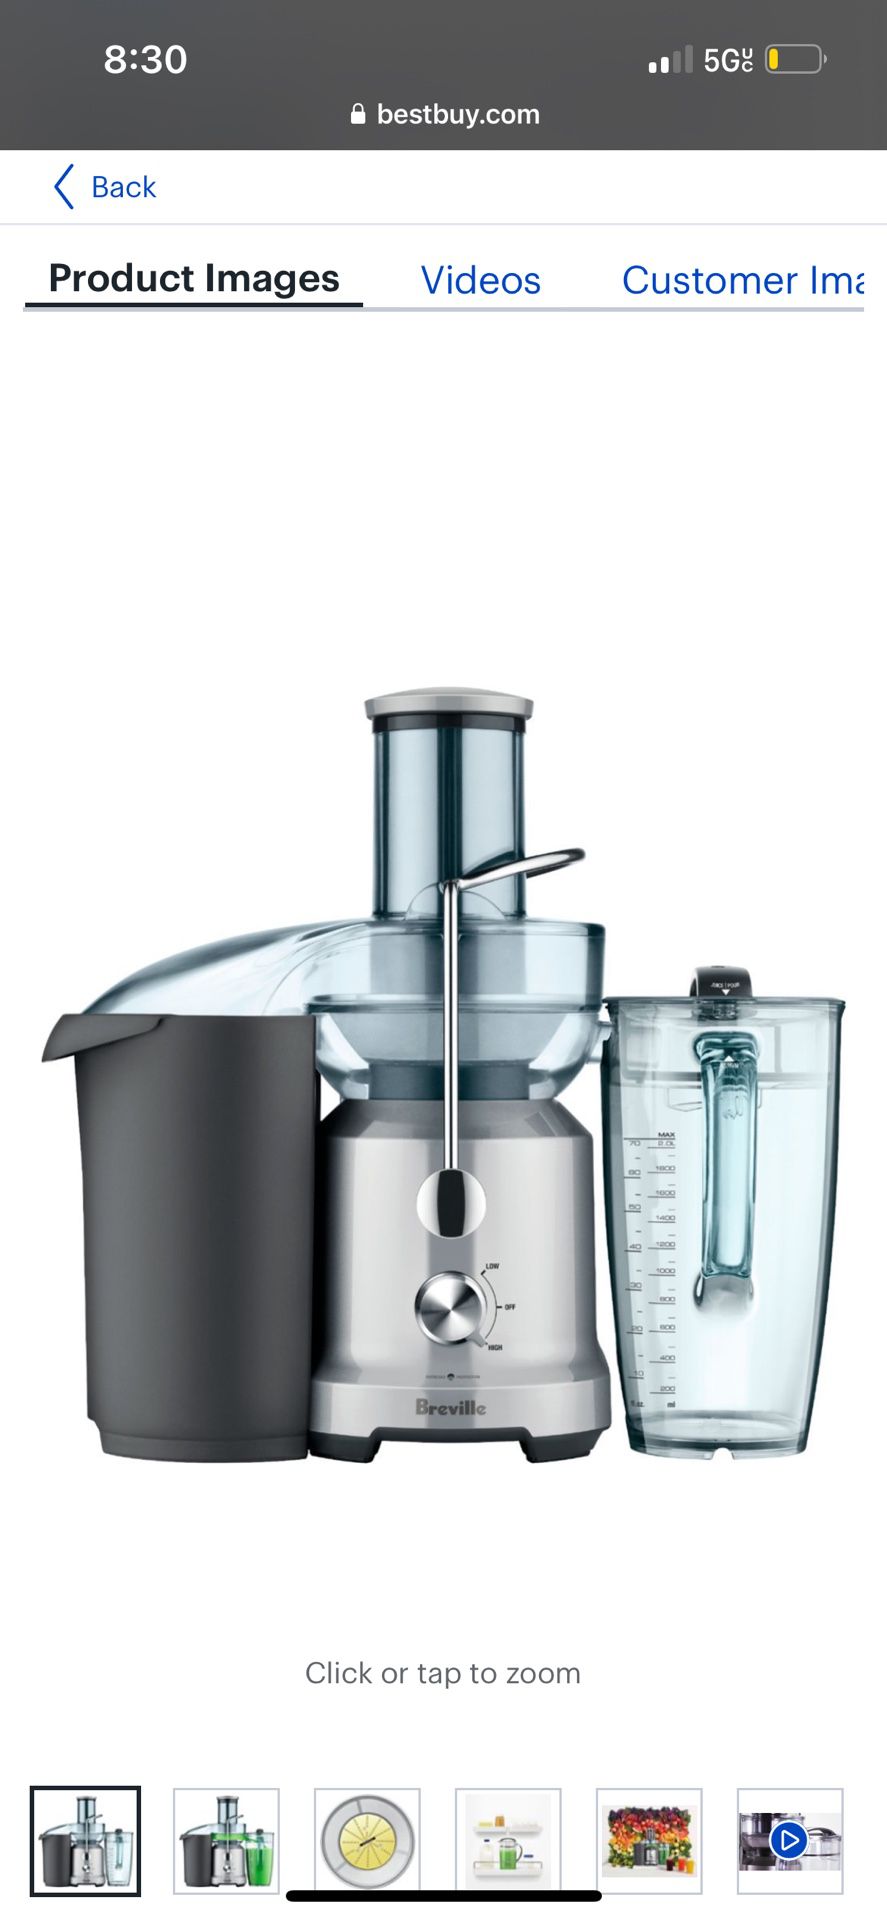 Breville - Juice Fountain Cold Electric Juicer - Silver